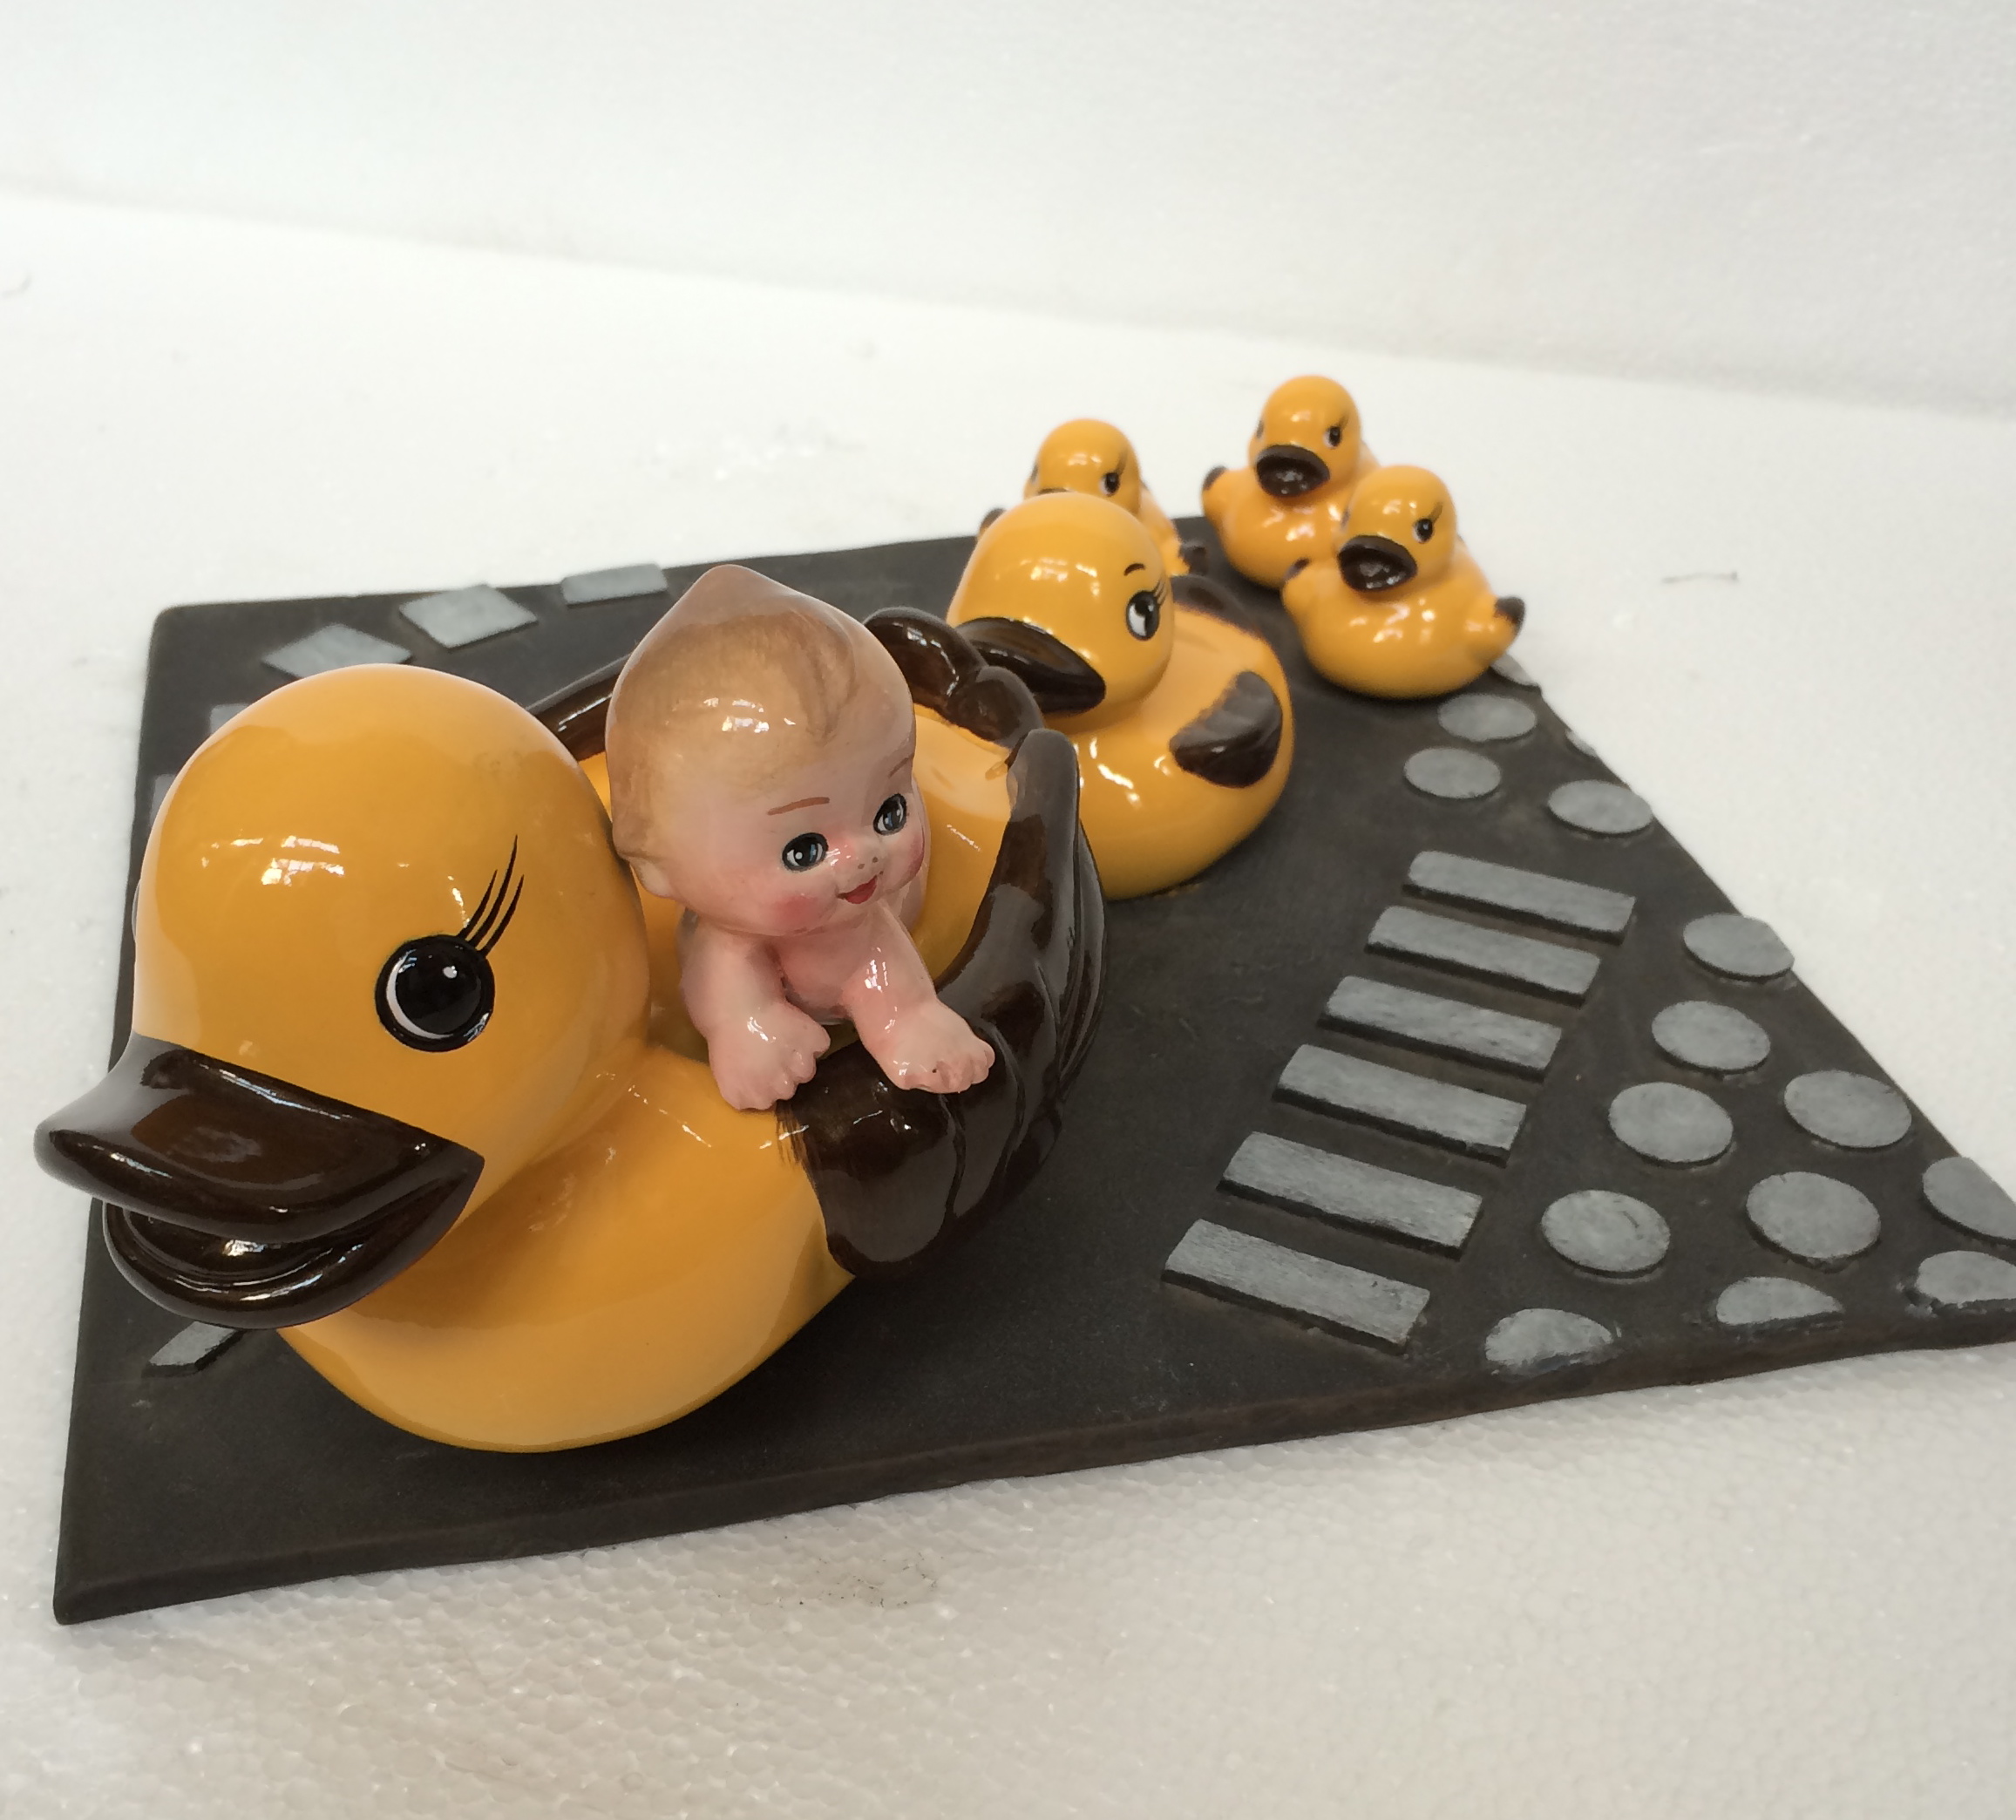 The Conrad Hotel has a yellow ducky in each bathroom - Poller takes it to bed in bronze